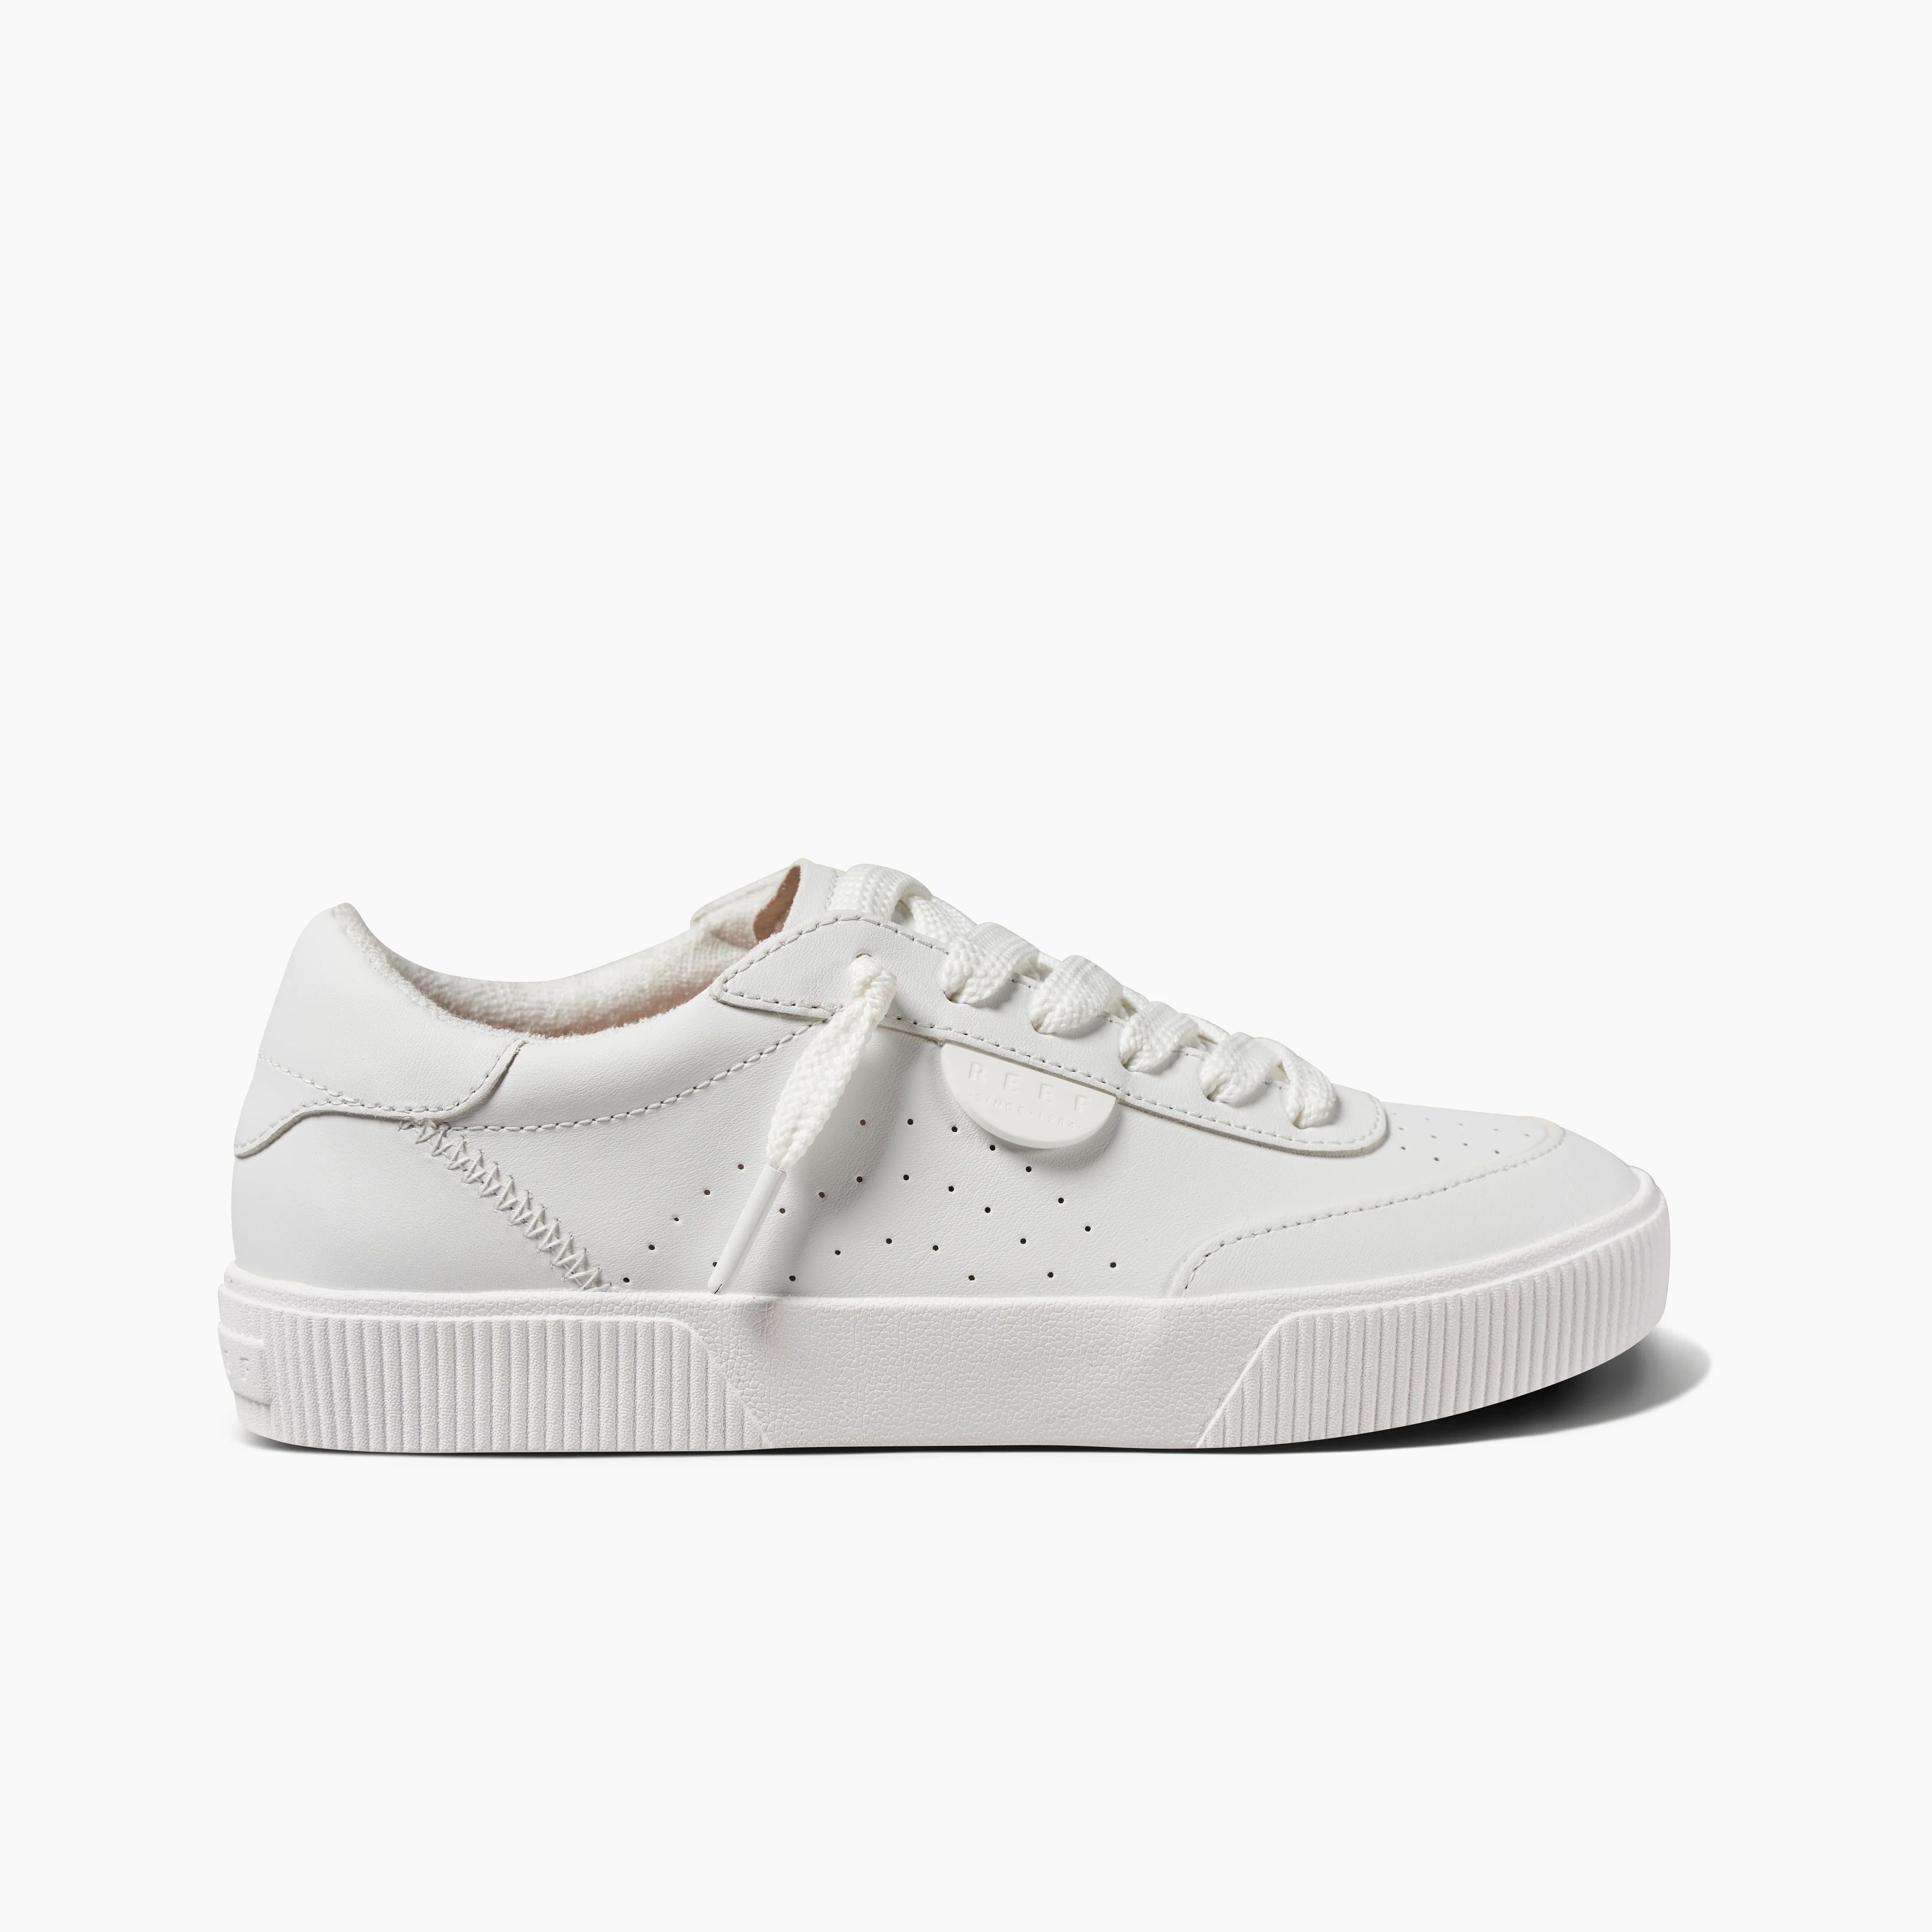 Lay Day Seas: Women's White Leather Sneakers | REEF® | Reef